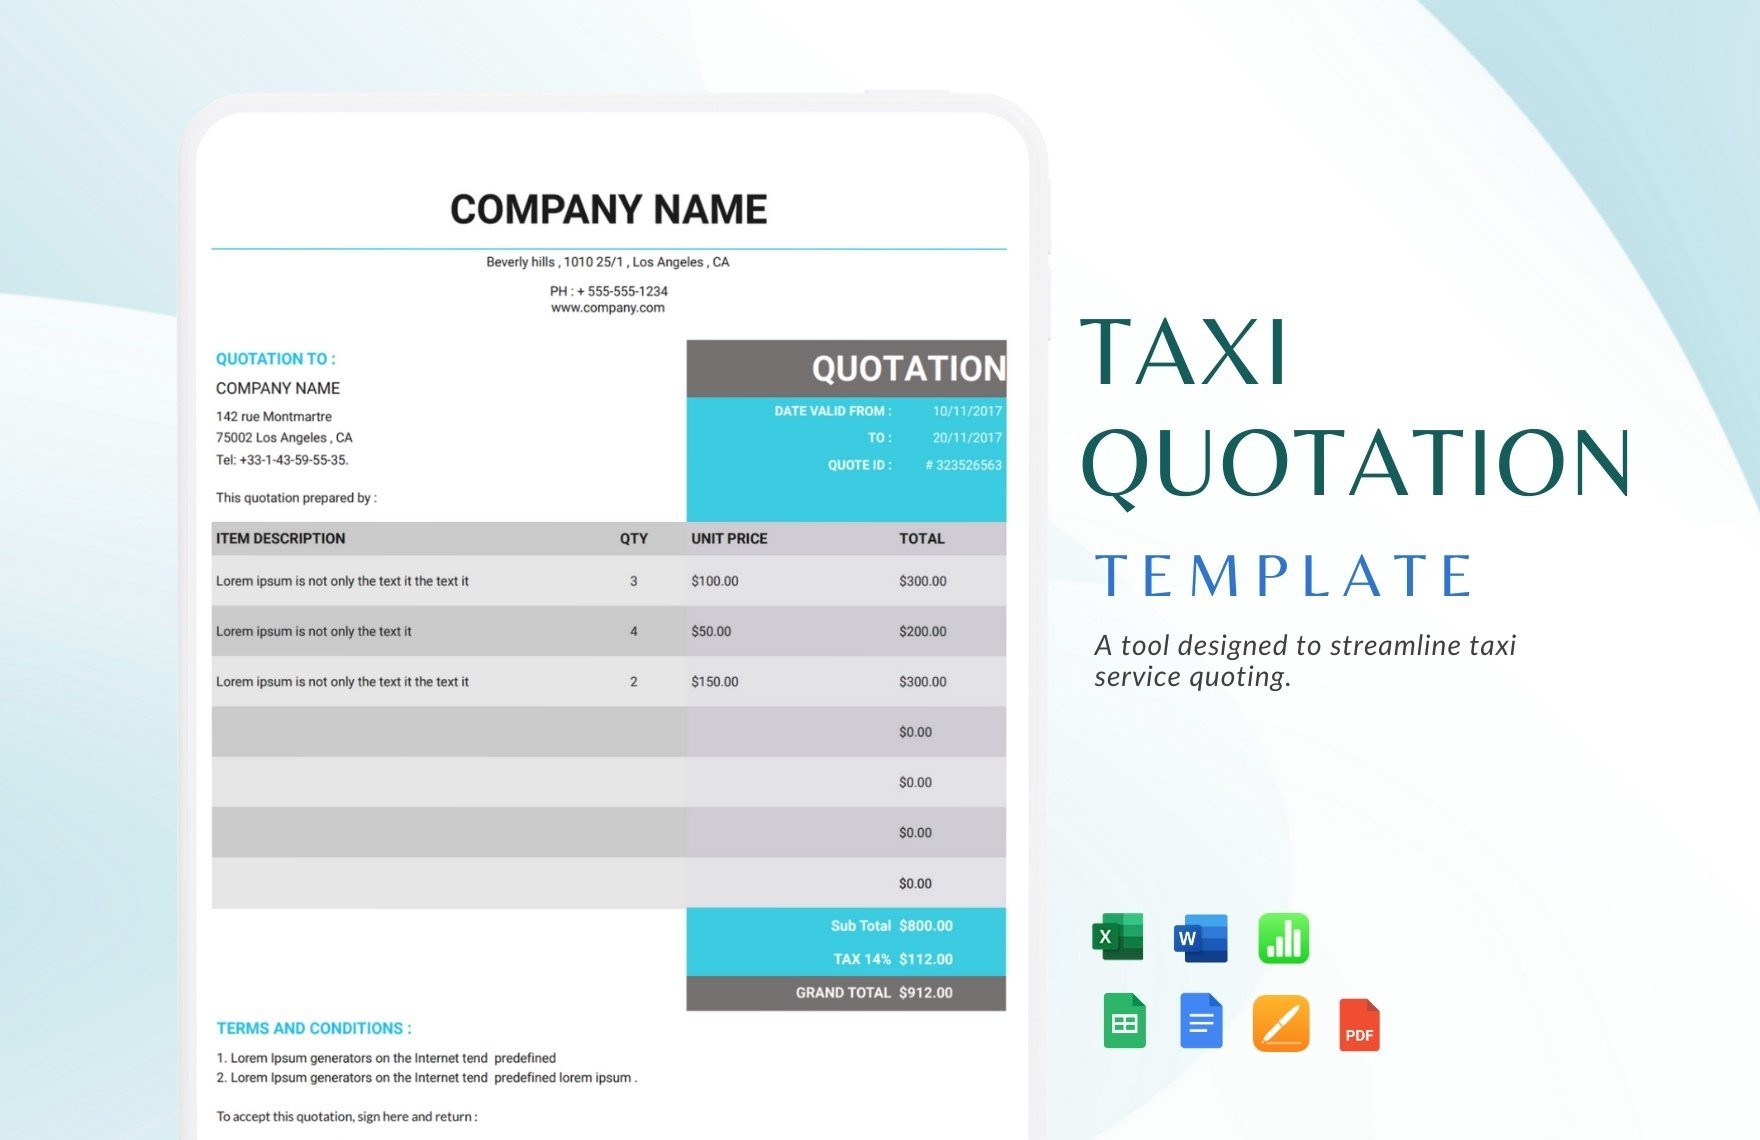 Taxi Quotation Template in Word, Google Docs, Excel, PDF, Google Sheets, Apple Pages, Apple Numbers